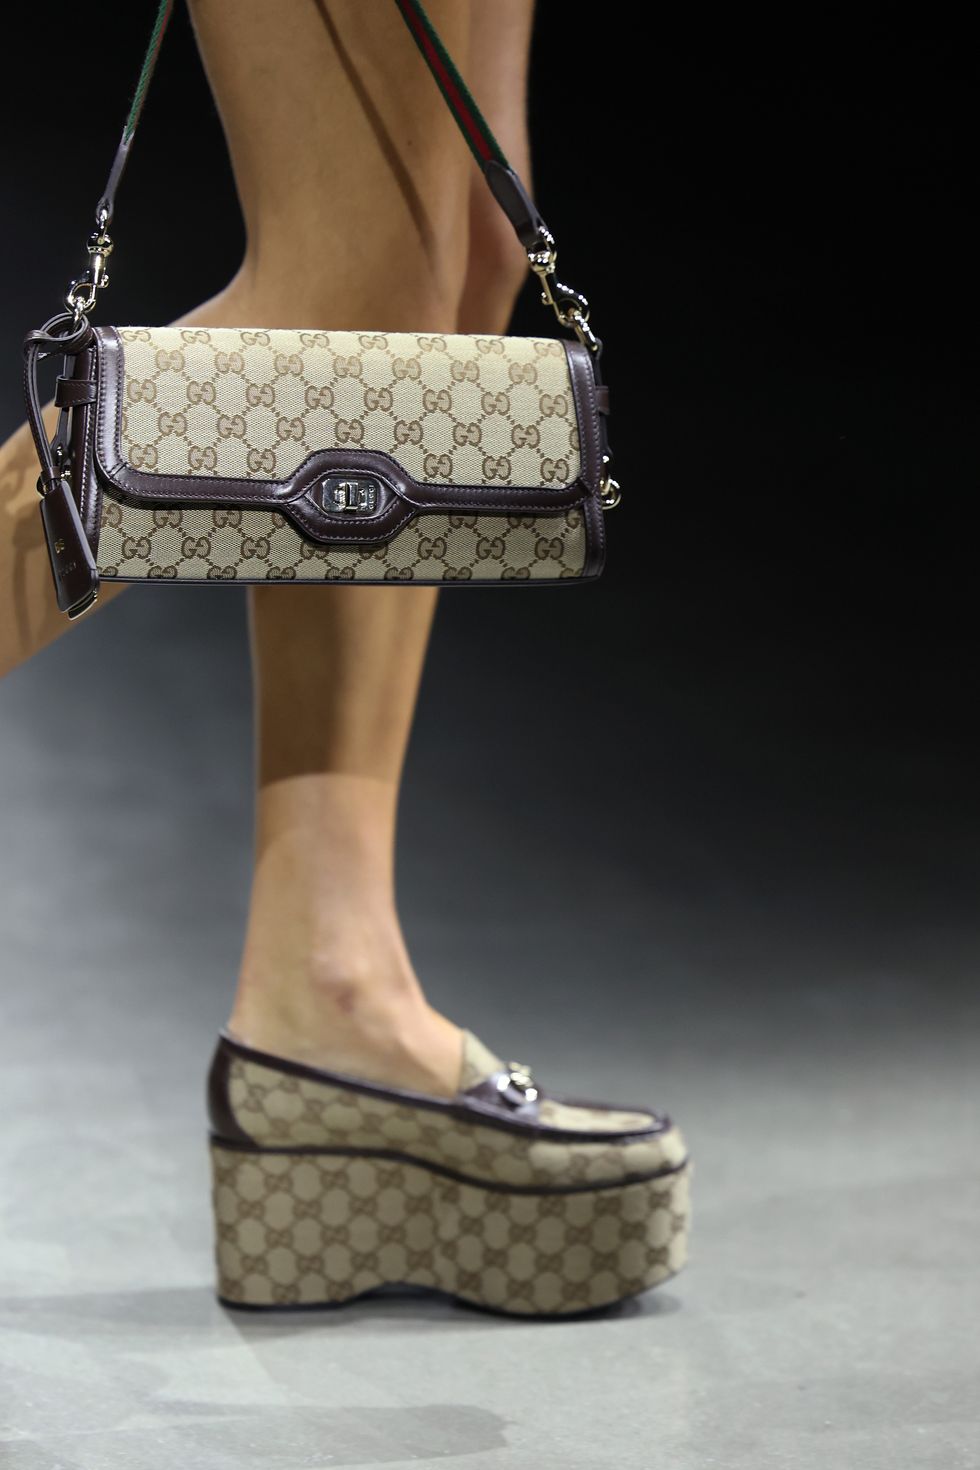 milan, italy september 22 a model, bag detail, walks the runway of gucci ancora during milan fashion week on september 22, 2023 in milan, italy photo by daniele venturelligetty images for gucci